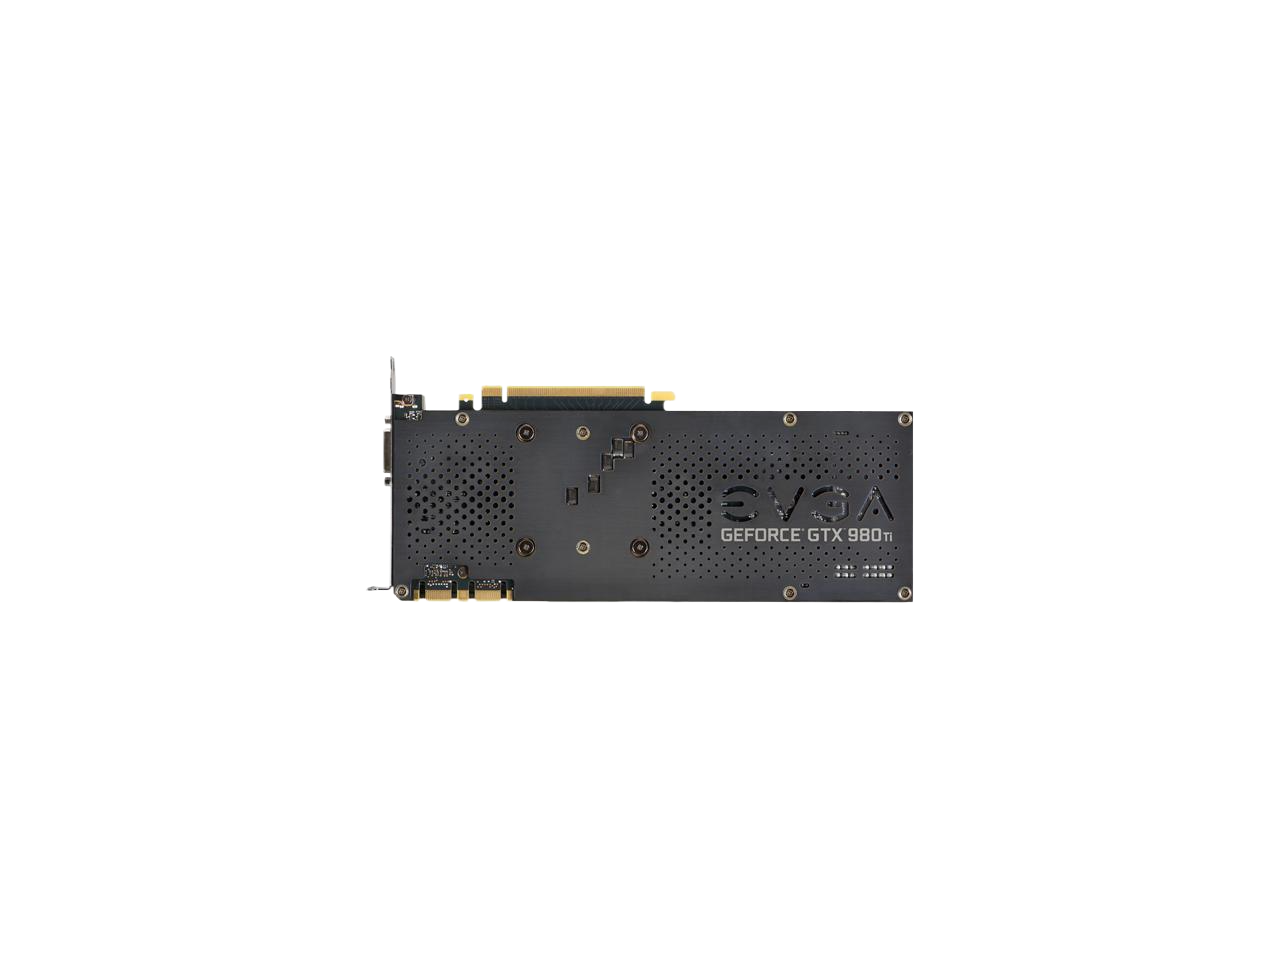 EVGA GeForce GTX 980 Ti 6GB FTW GAMING w/ACX 2.0+ Whisper Silent Cooling w/ Free Installed Backplate Graphics Card 06G-P4-4996-KR